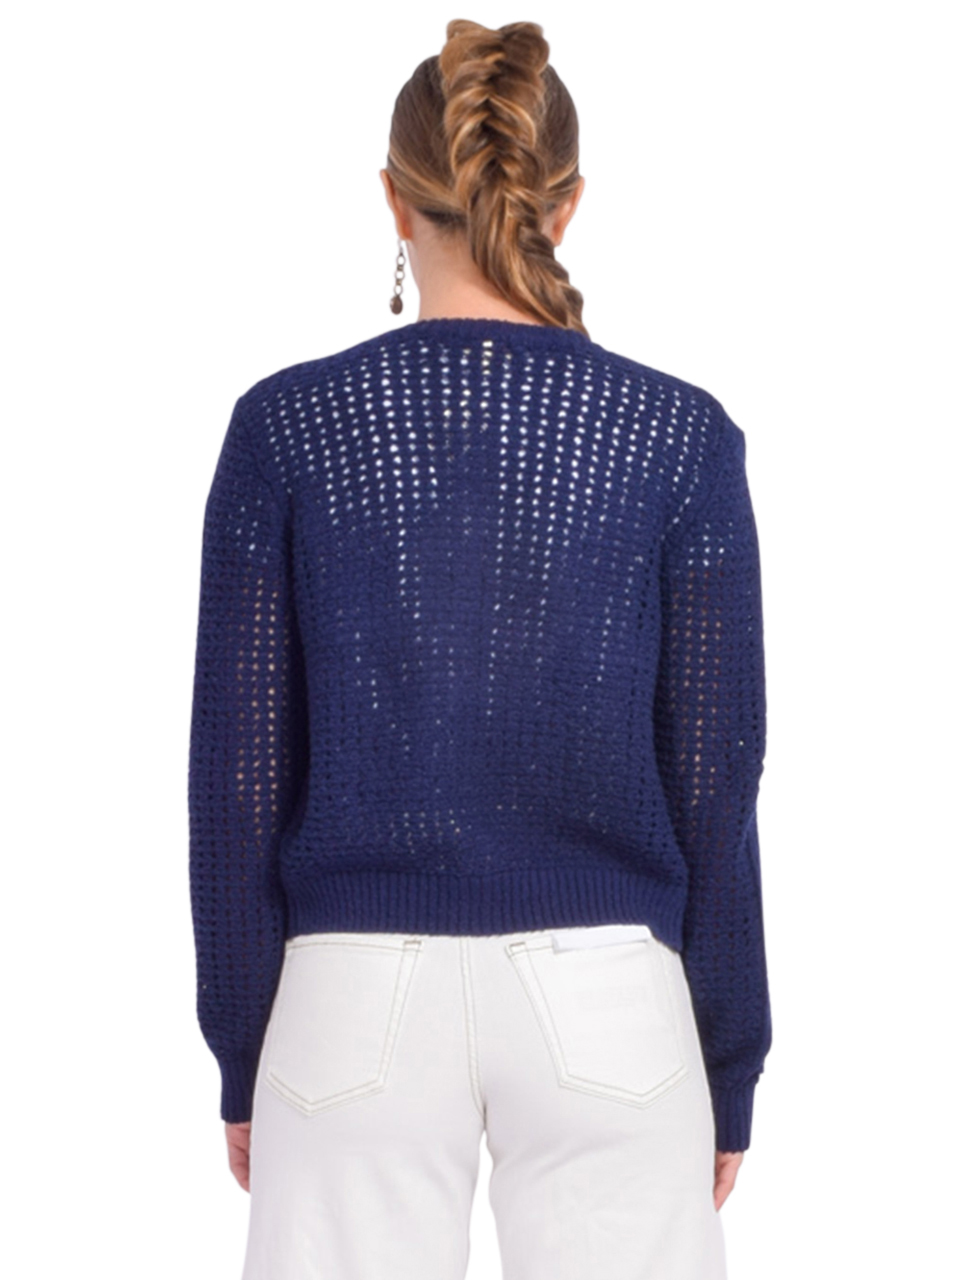 FRAME Tape Yarn Cropped Cardigan in Navy Back View 